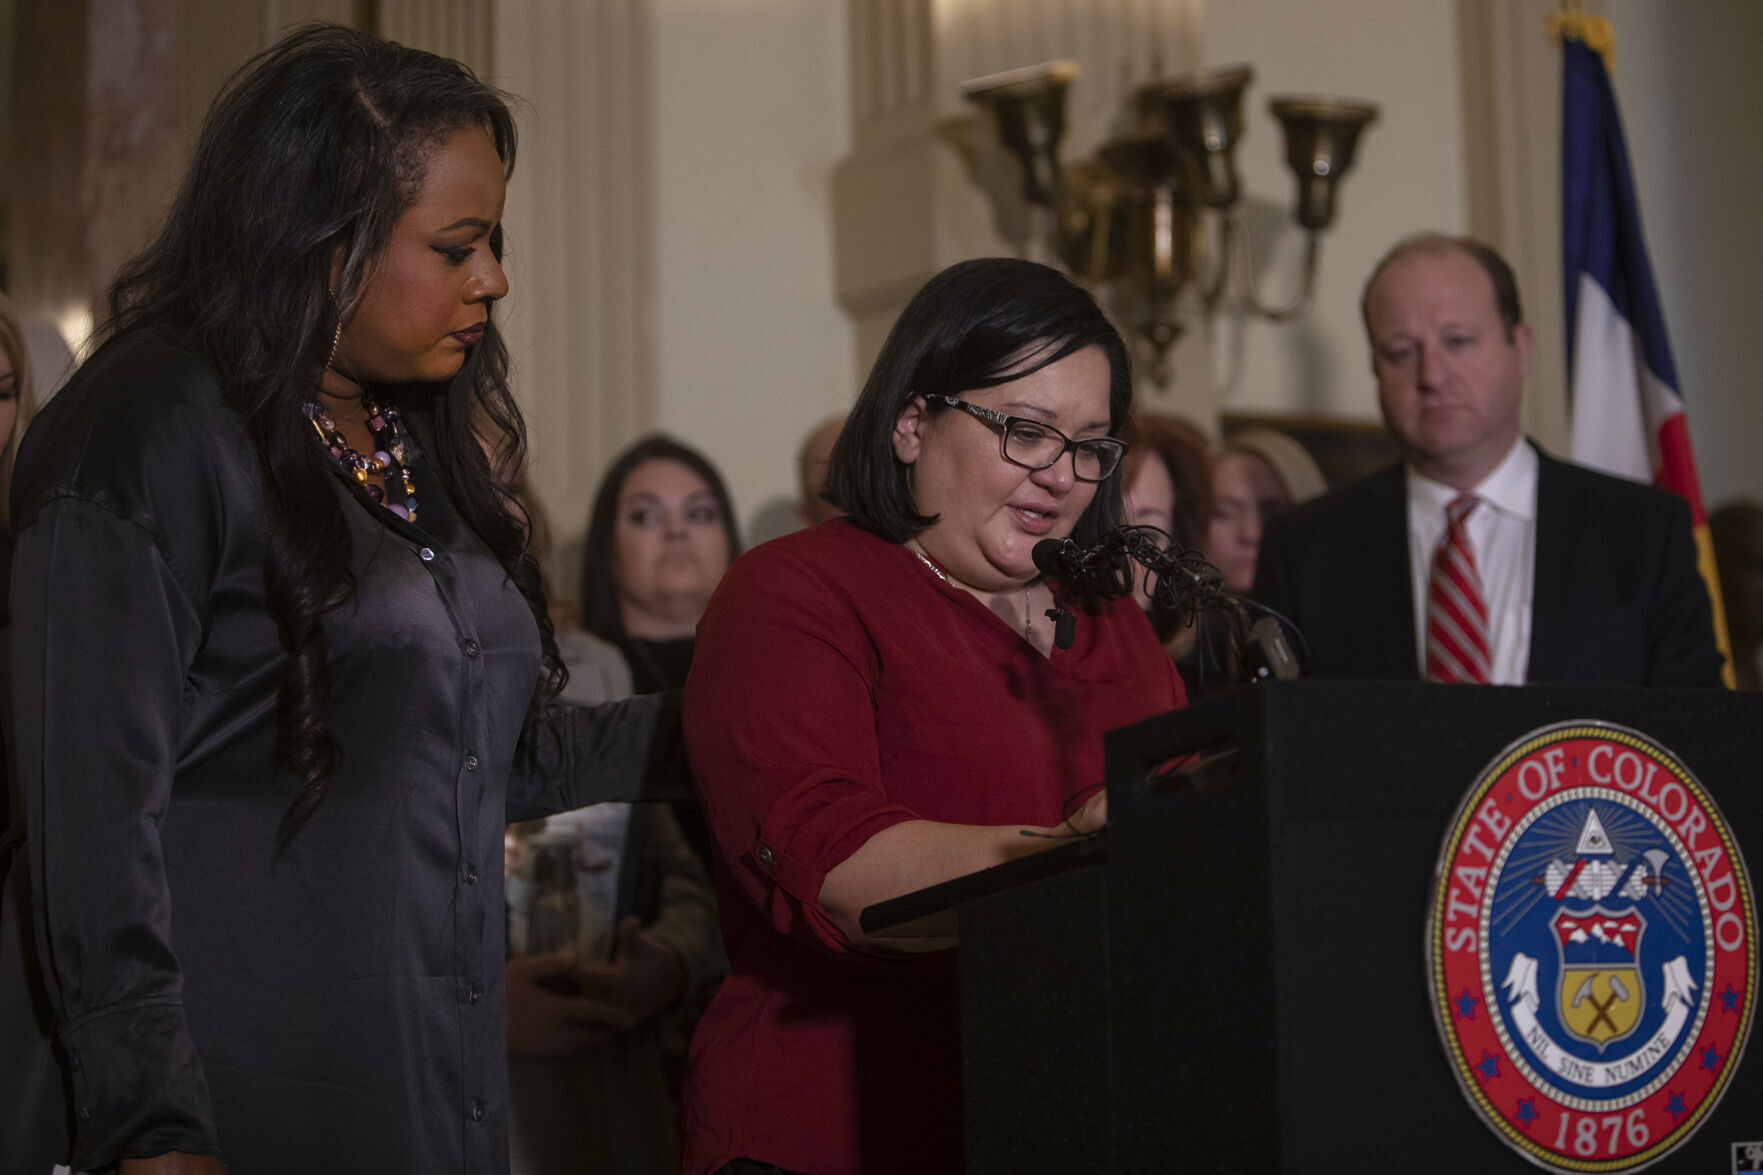 Aretta Gallegos spoke about her daughter, who died of fentanyl poisoning, during a March 2022 press conference at the Colorado State Capitol. (Timothy Hurst/The Denver Gazette)